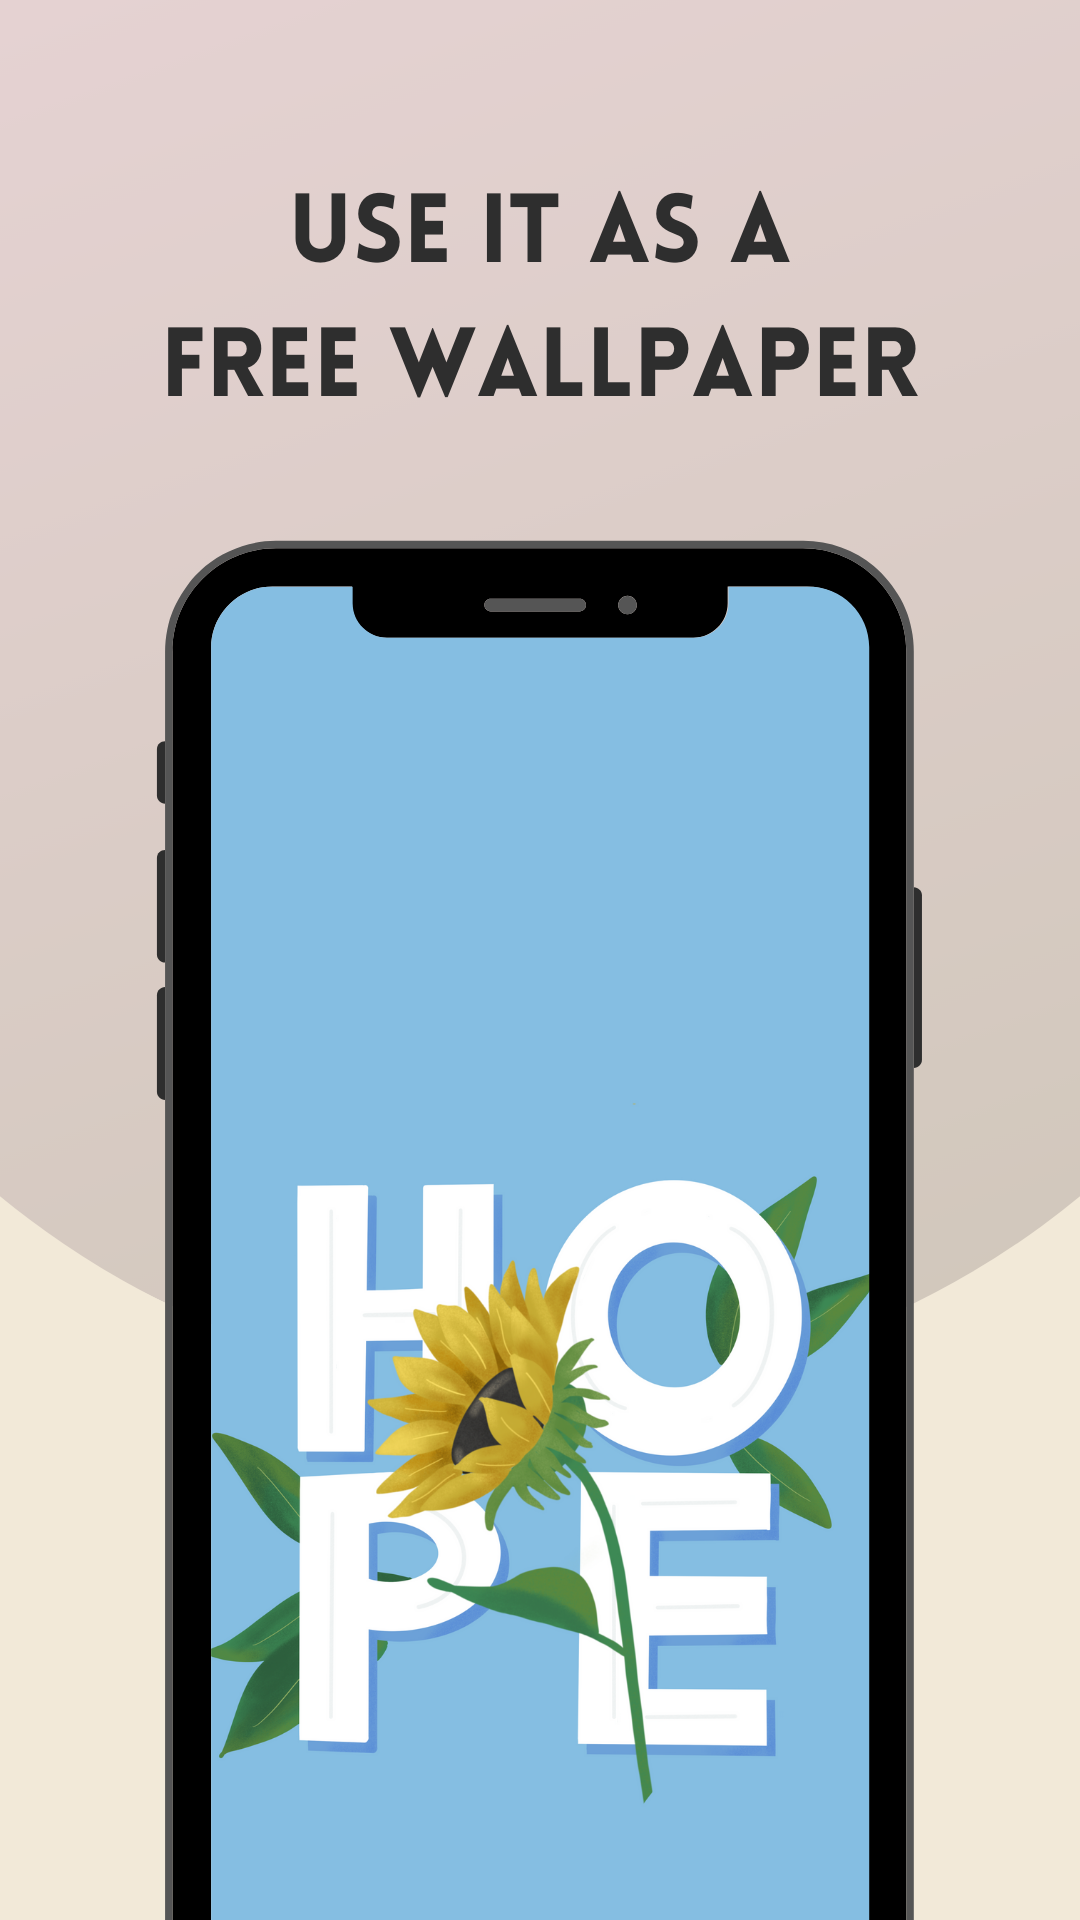 Image contains a black smartphone with a custom wallpaper. The wallpaper is the word HOPE in white letters on a blue background with a sunflower and green leaves.